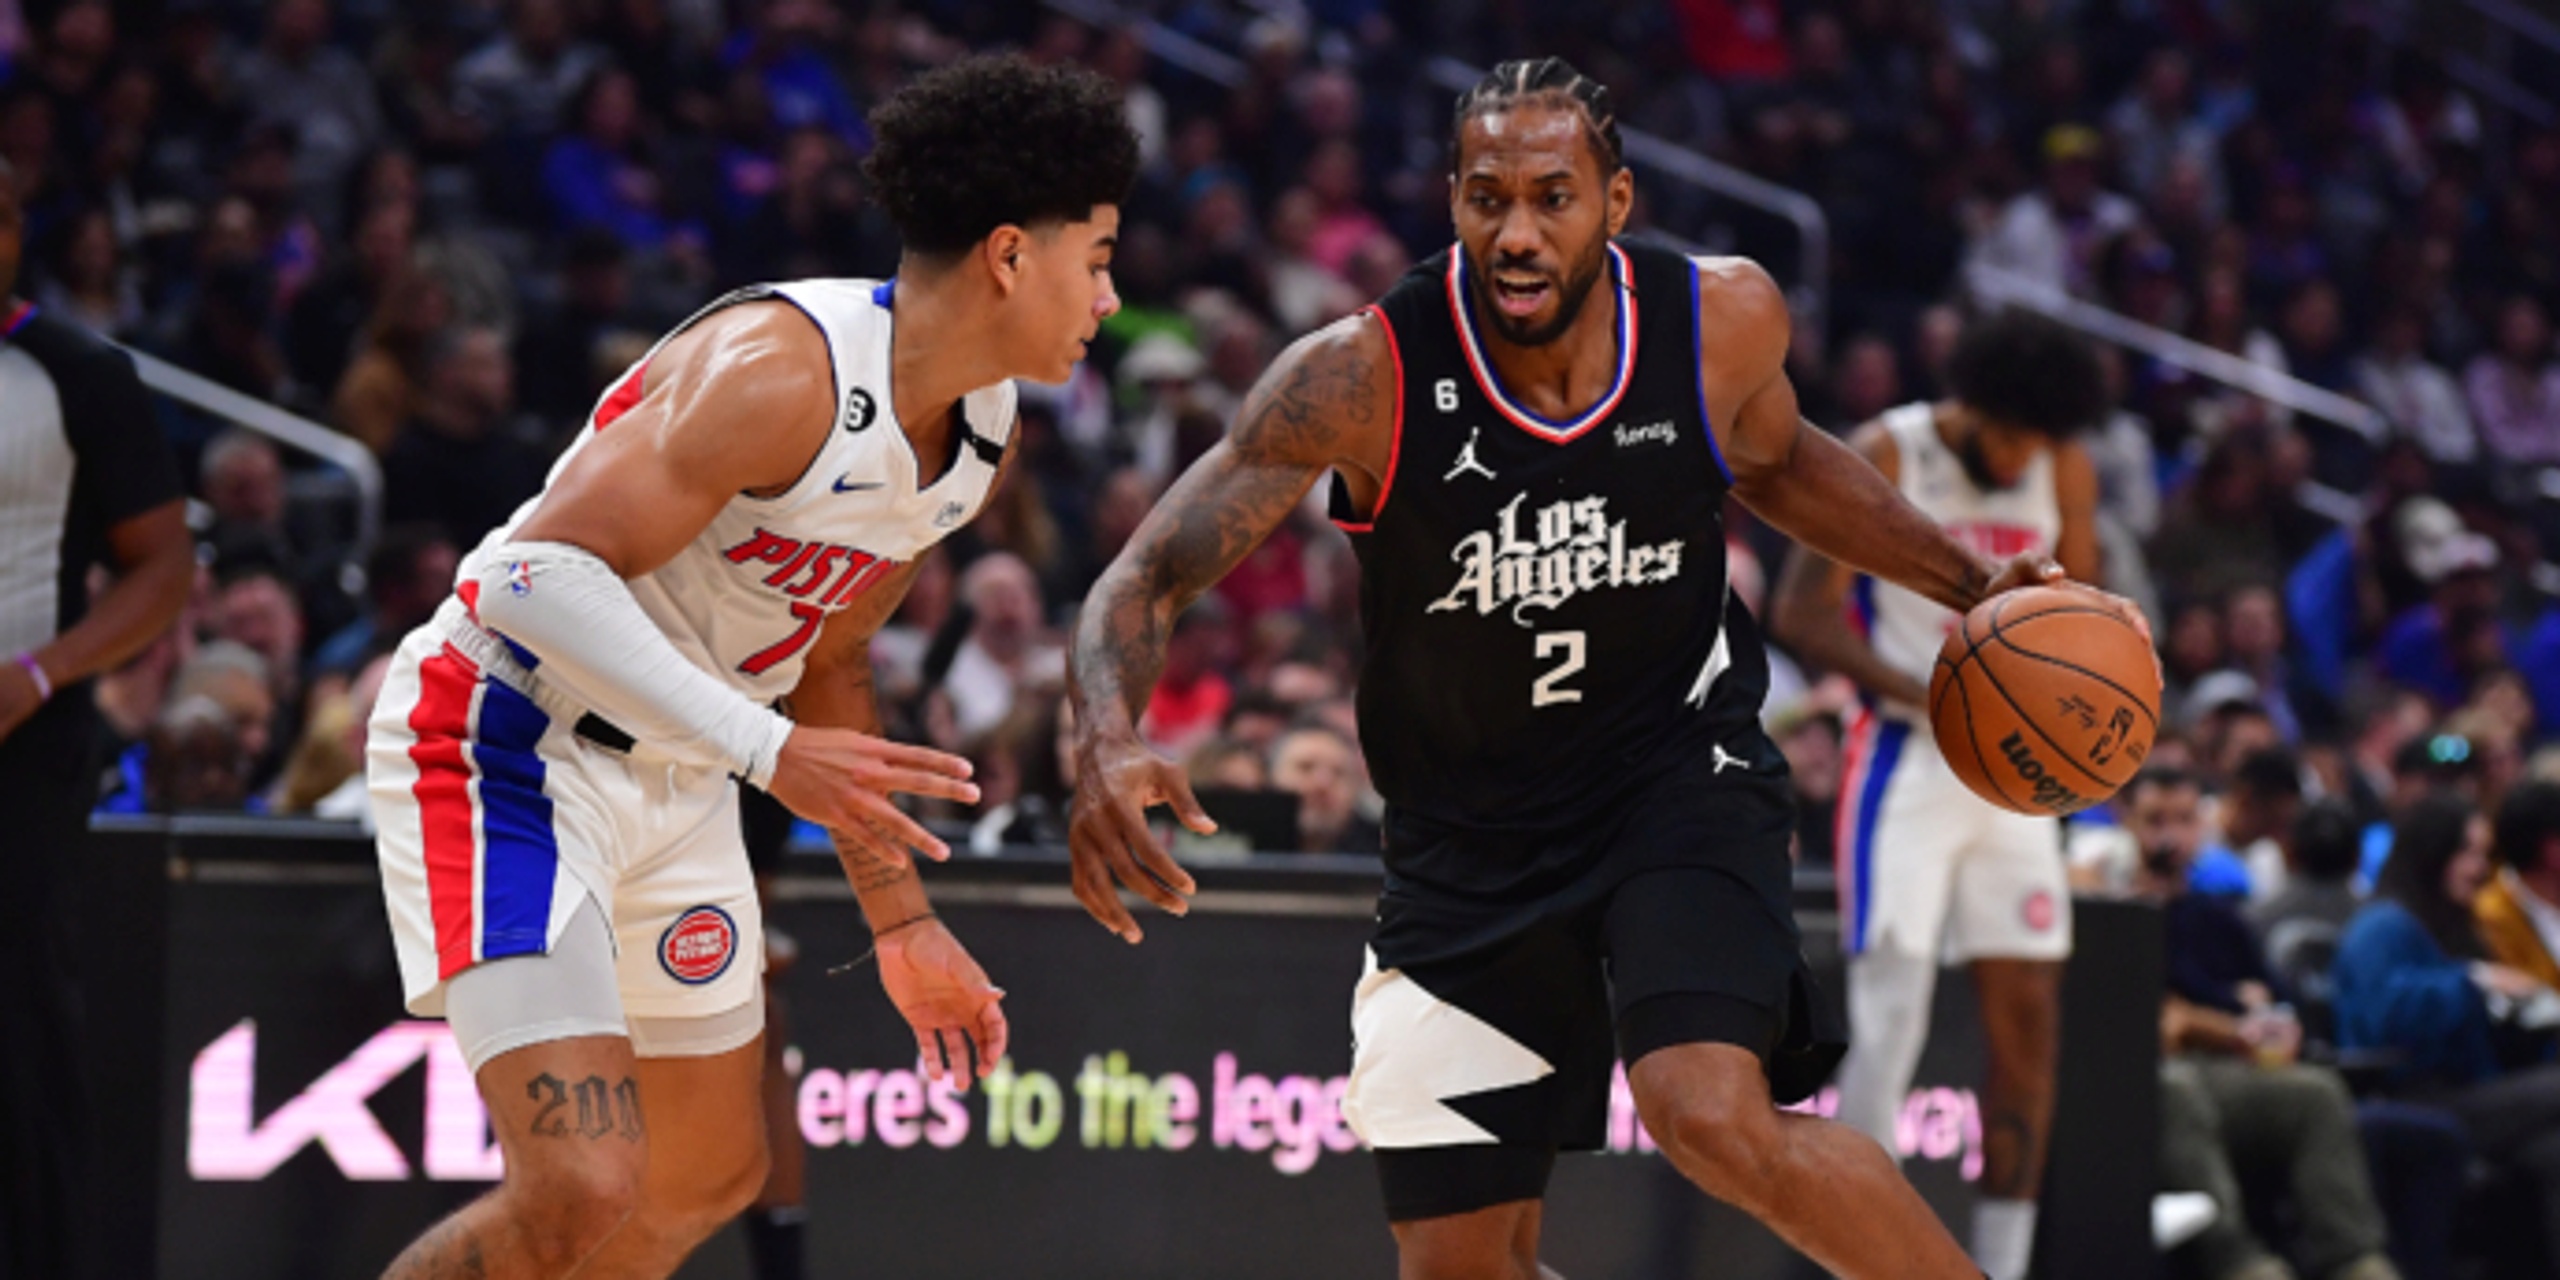 Clippers rally to beat Pistons 96-91 in Leonard's return